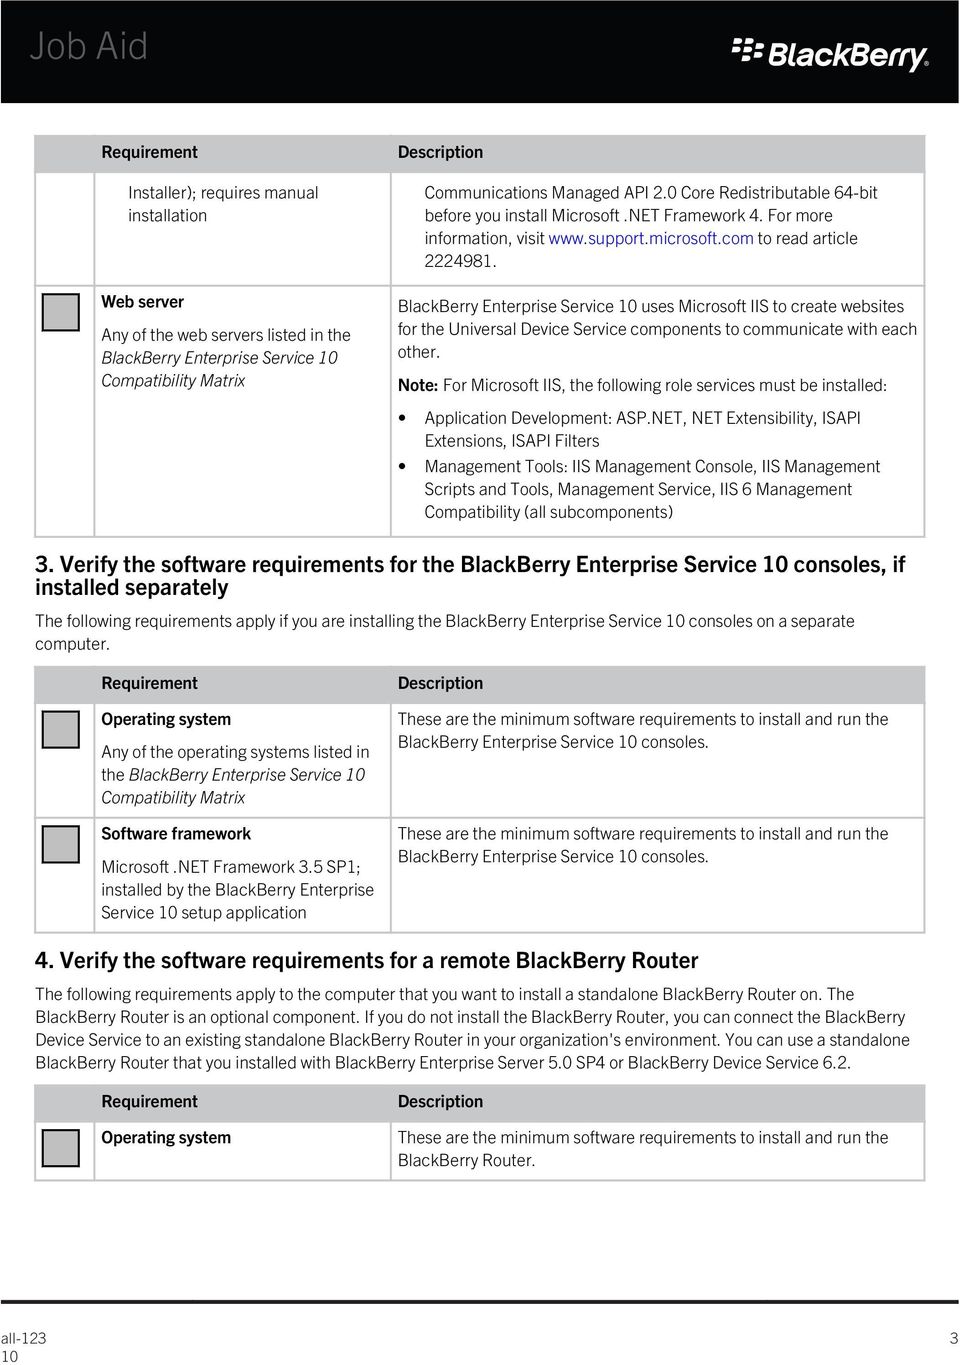 BlackBerry Enterprise Service uses Microsoft IIS to create websites for the Universal Device Service components to communicate with each other.